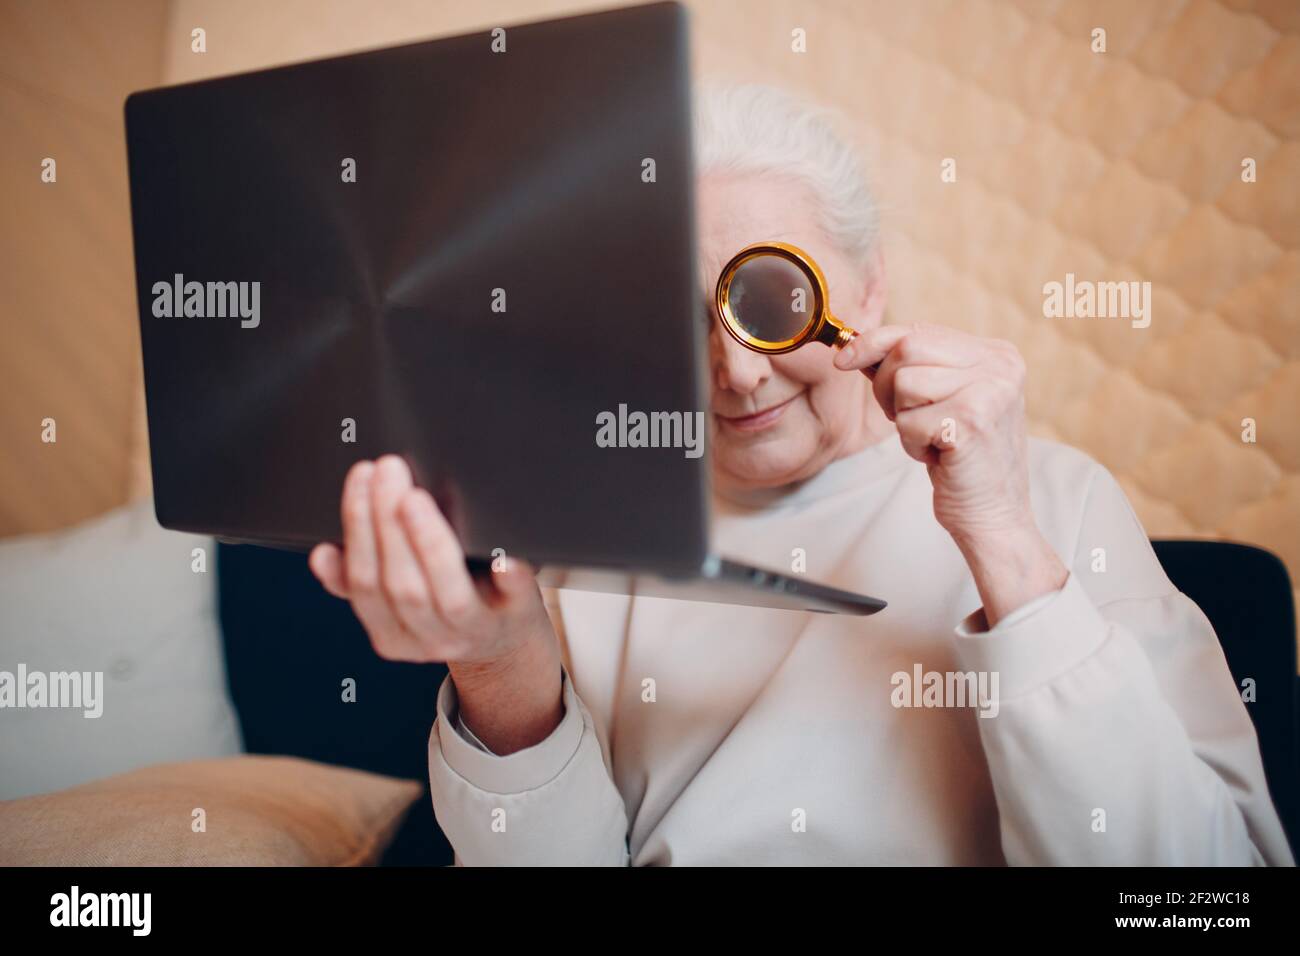 Elderly woman grandmother learns to work at home on laptop computer and internet with magnifier. Stock Photo